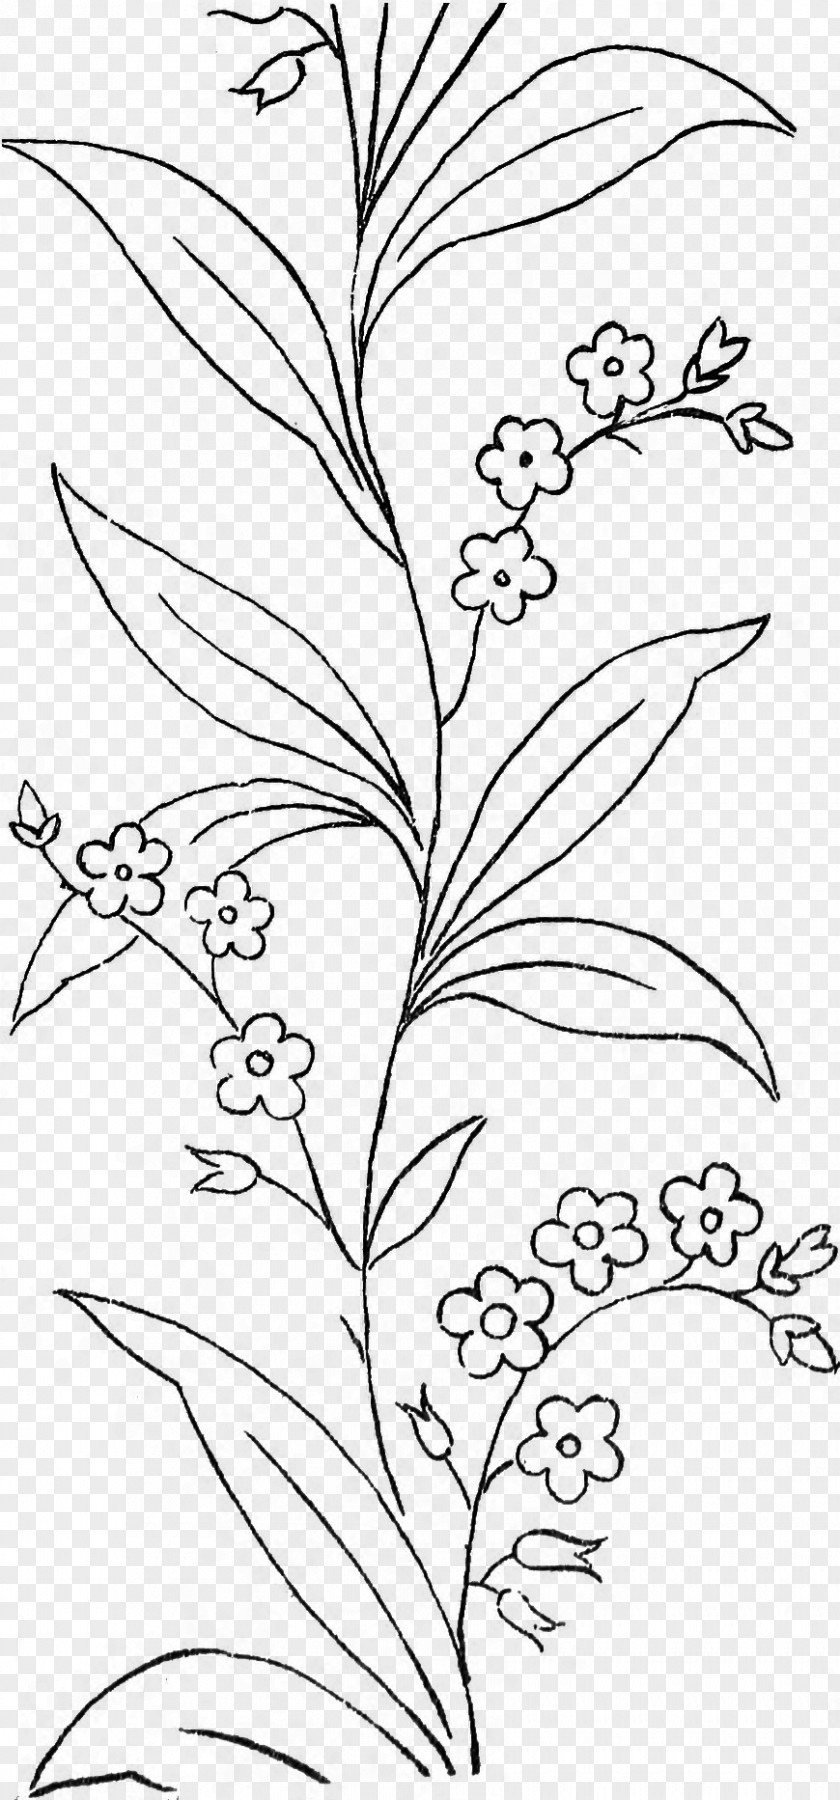 Forget Me Not Black And White Leaf Line Art Drawing Coloring Book PNG